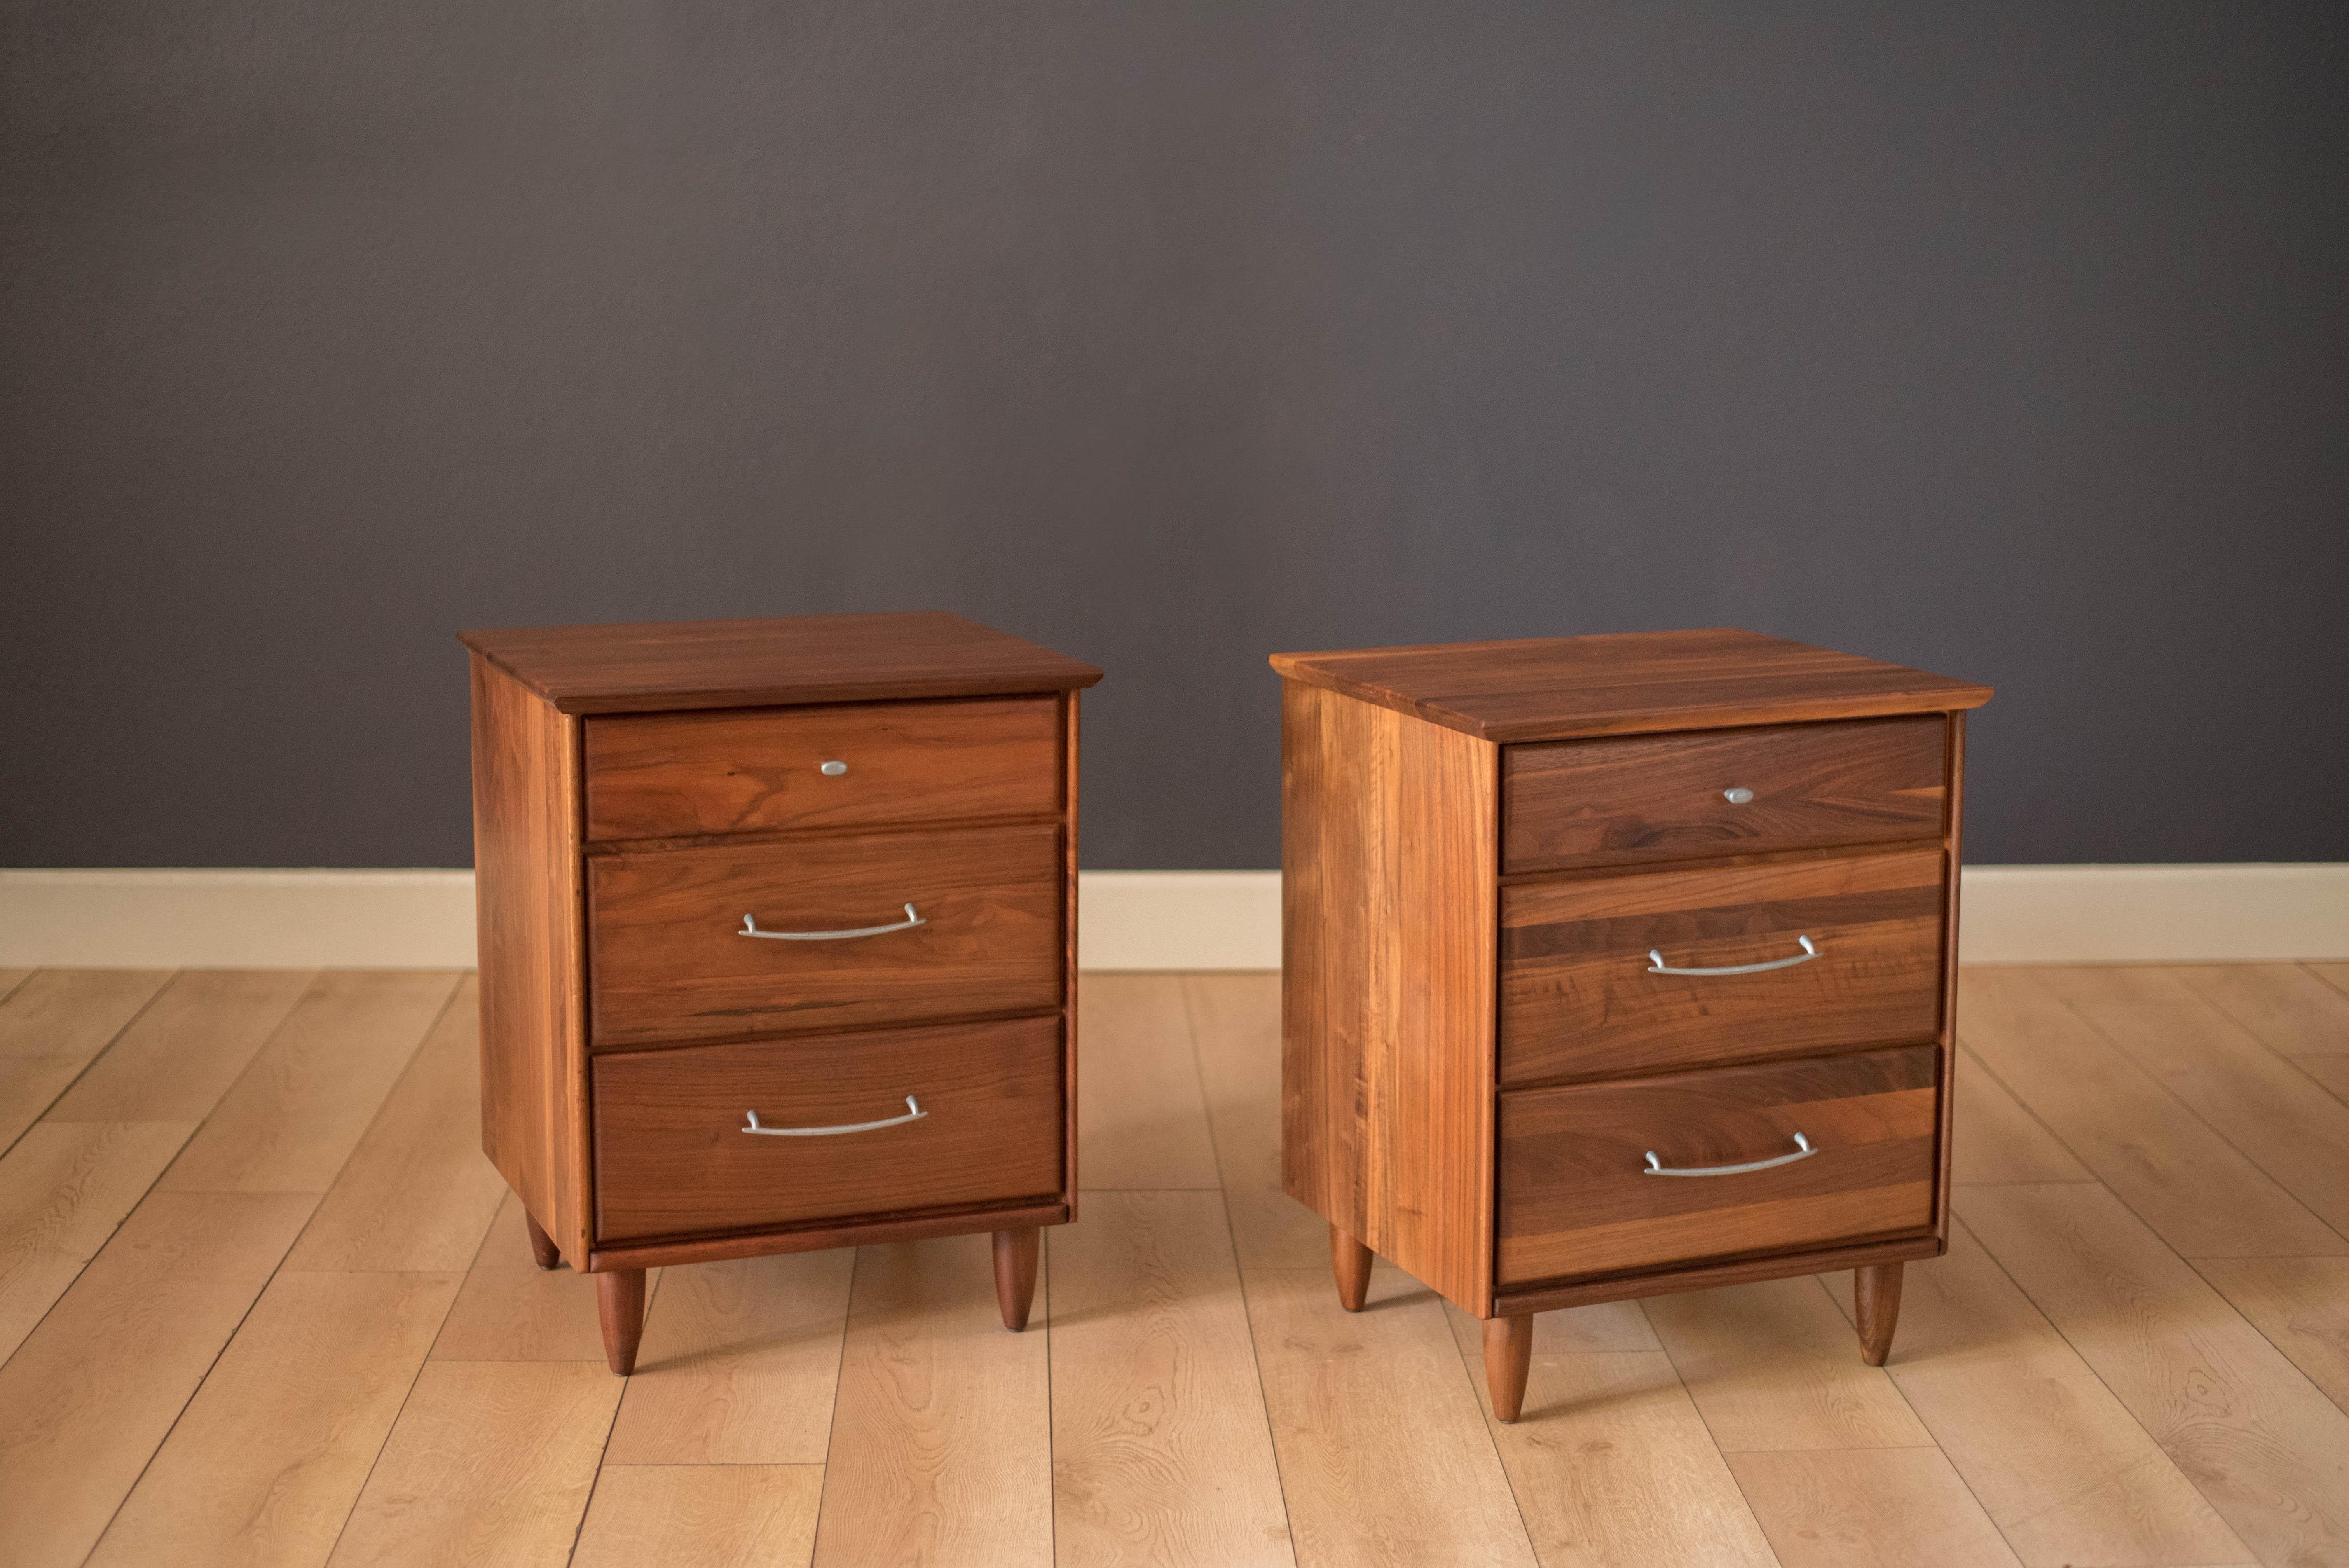 Mid-Century Modern pair of nightstands or bedside tables by ACE-HI Furniture, California. This set is made of solid planked walnut and includes three storage drawers with pewter handles. Price is for the pair.